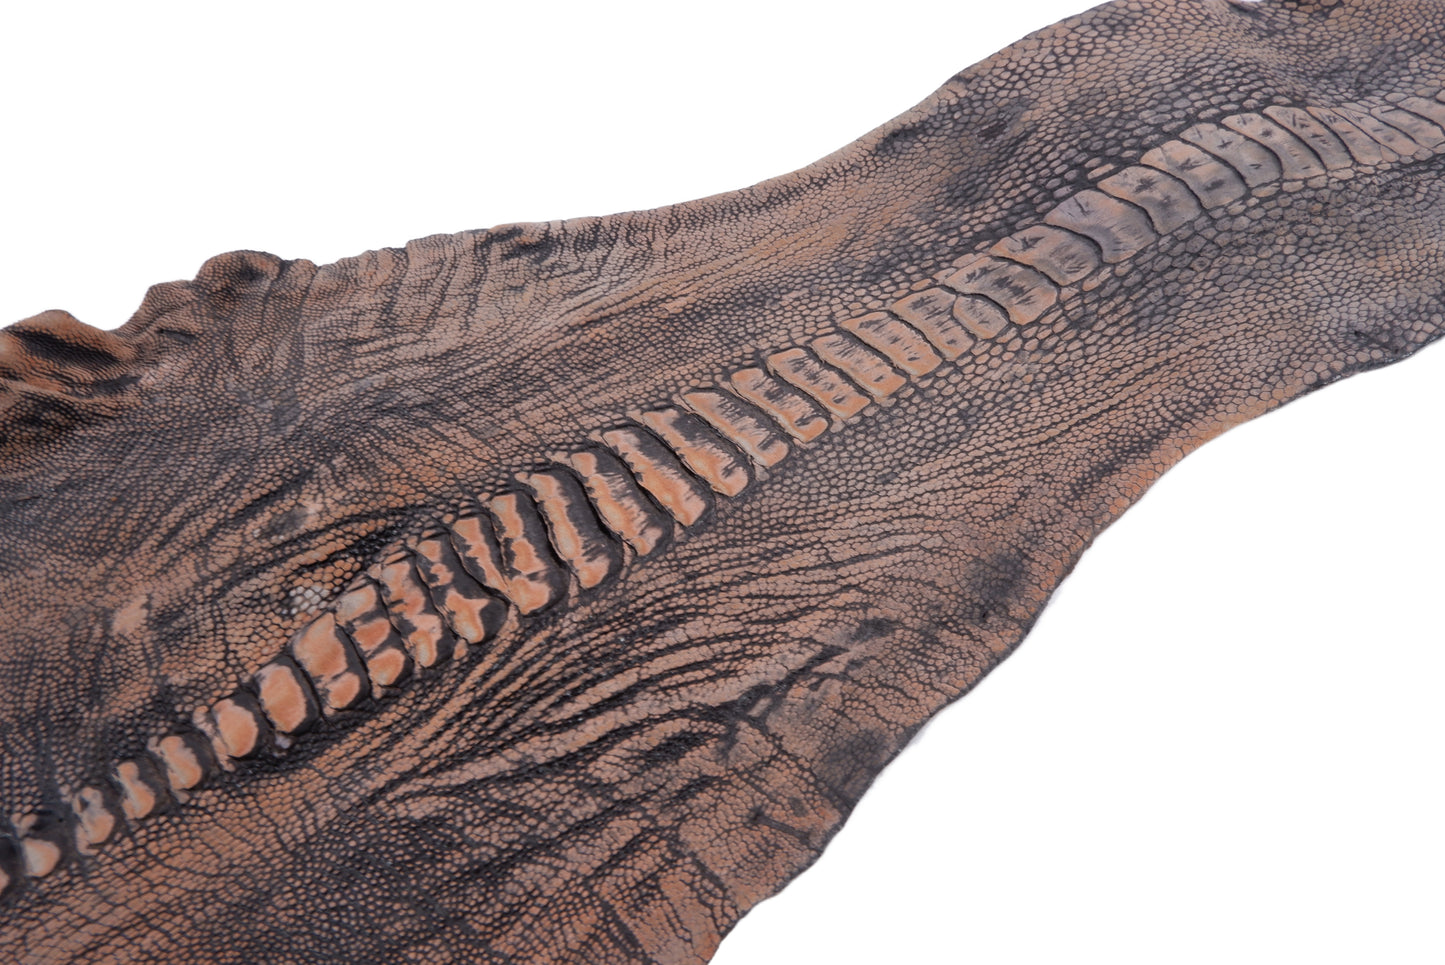 Genuine Ostrich Skin with Claw Leather Hide Pelt